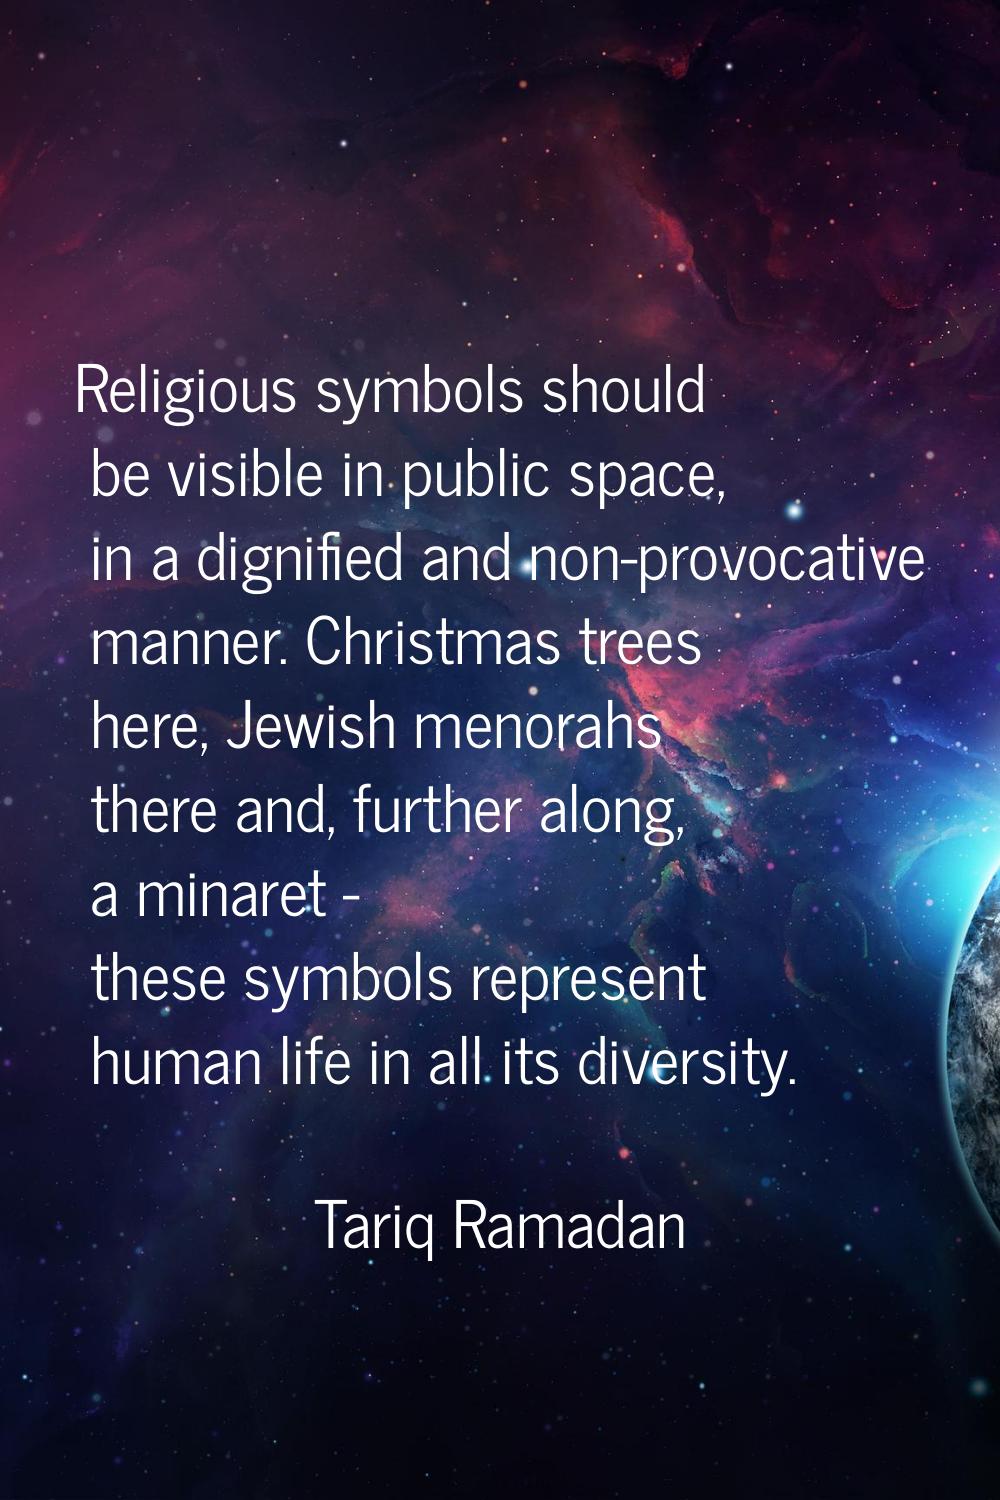 Religious symbols should be visible in public space, in a dignified and non-provocative manner. Chr